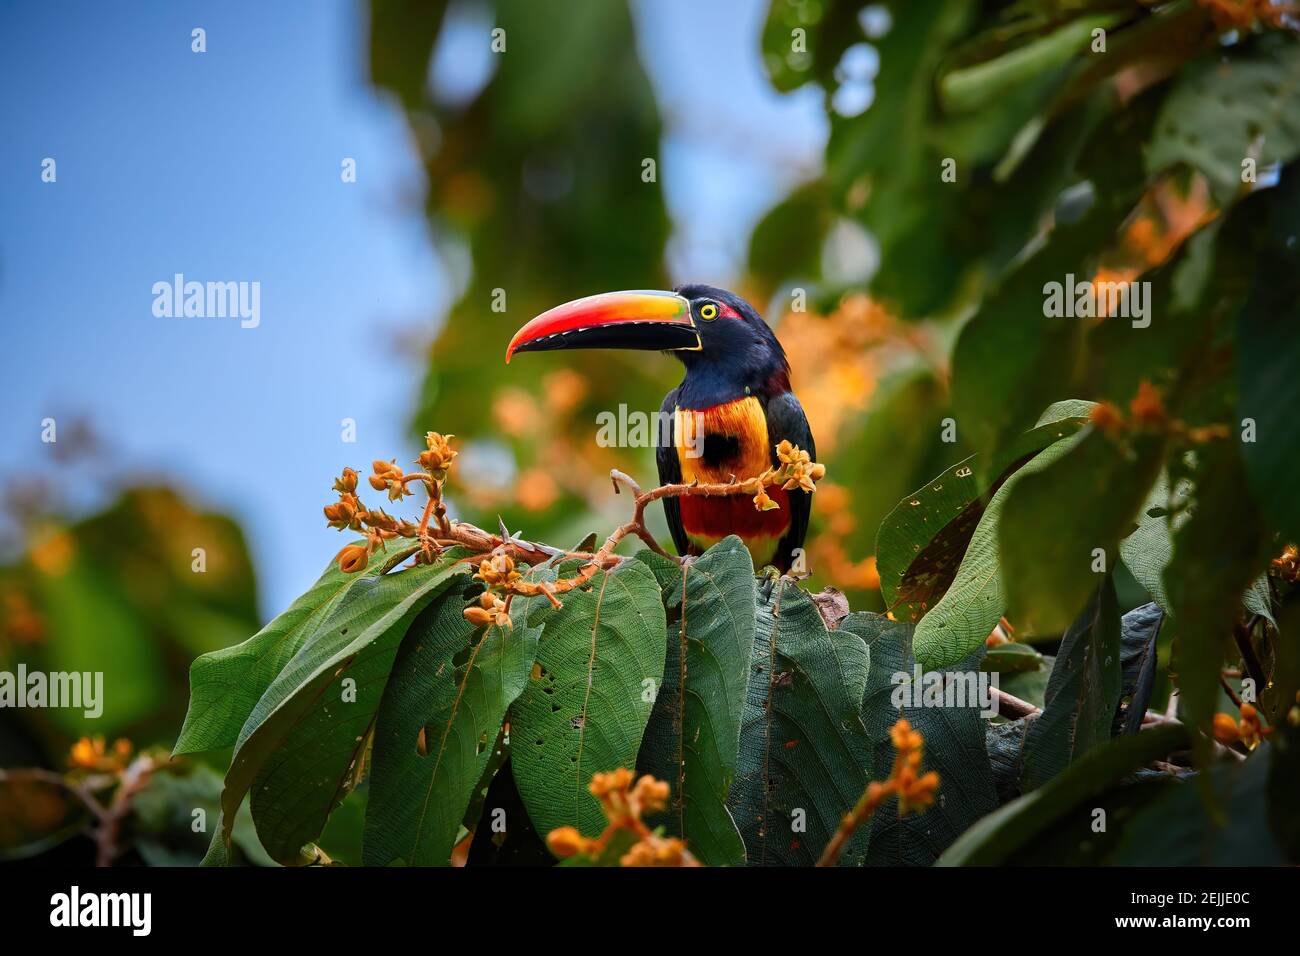 Fiery-billed aracari, Pteroglossus frantzii, toucan among green leaves and orange fruits. Large red-black bill, black, yellow and red plumage. Typical Stock Photo